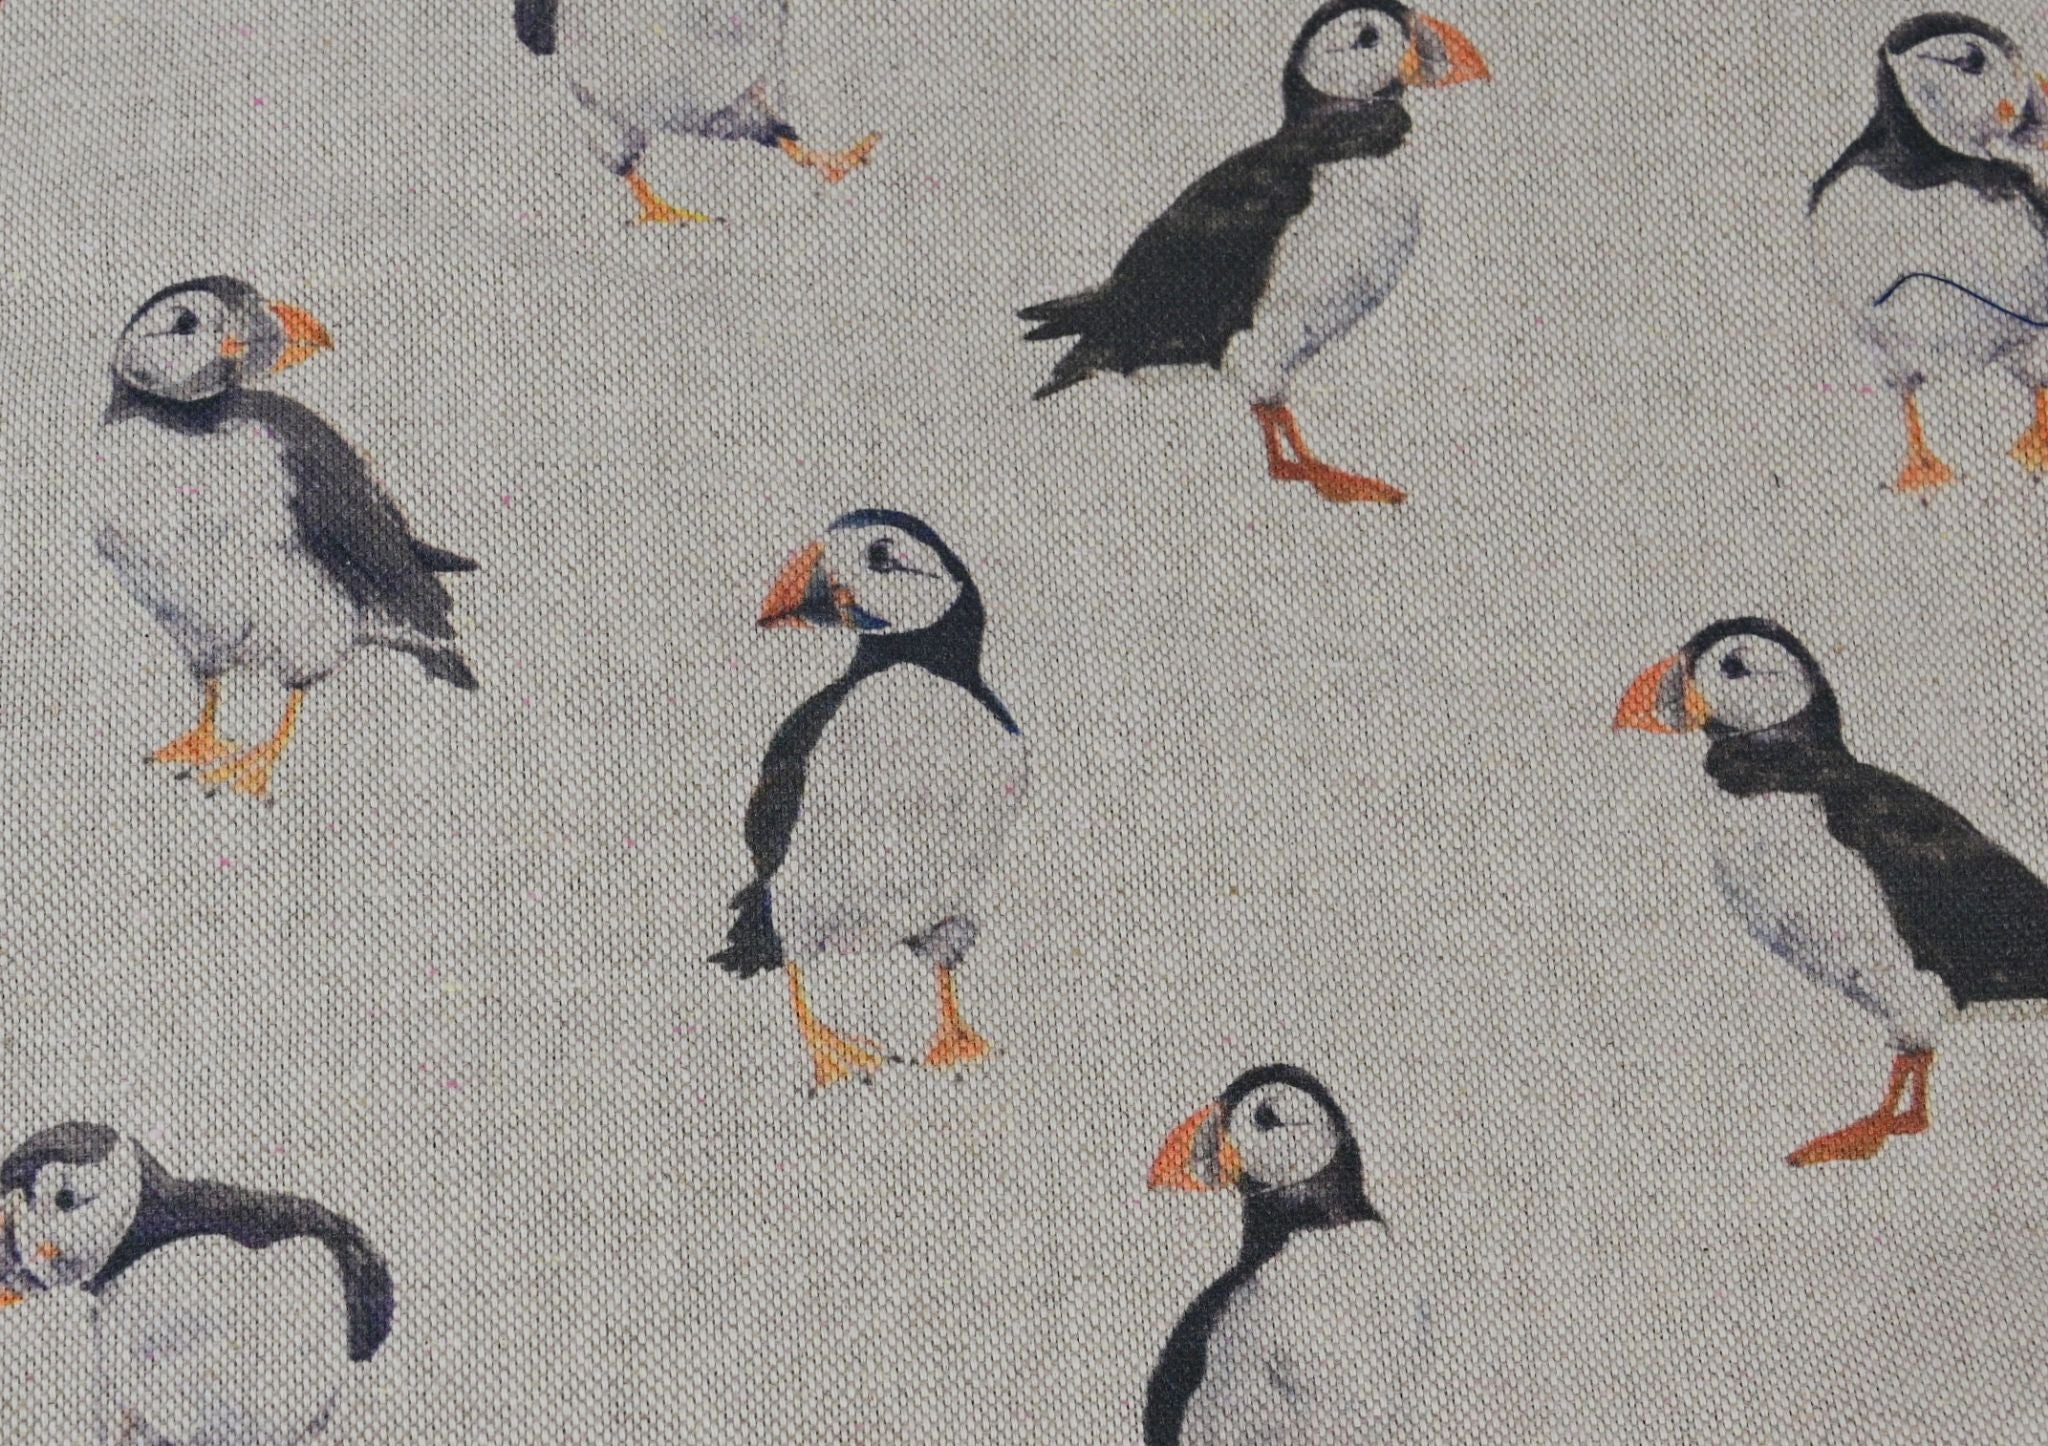 Magnetic Everhot Top, Puffins